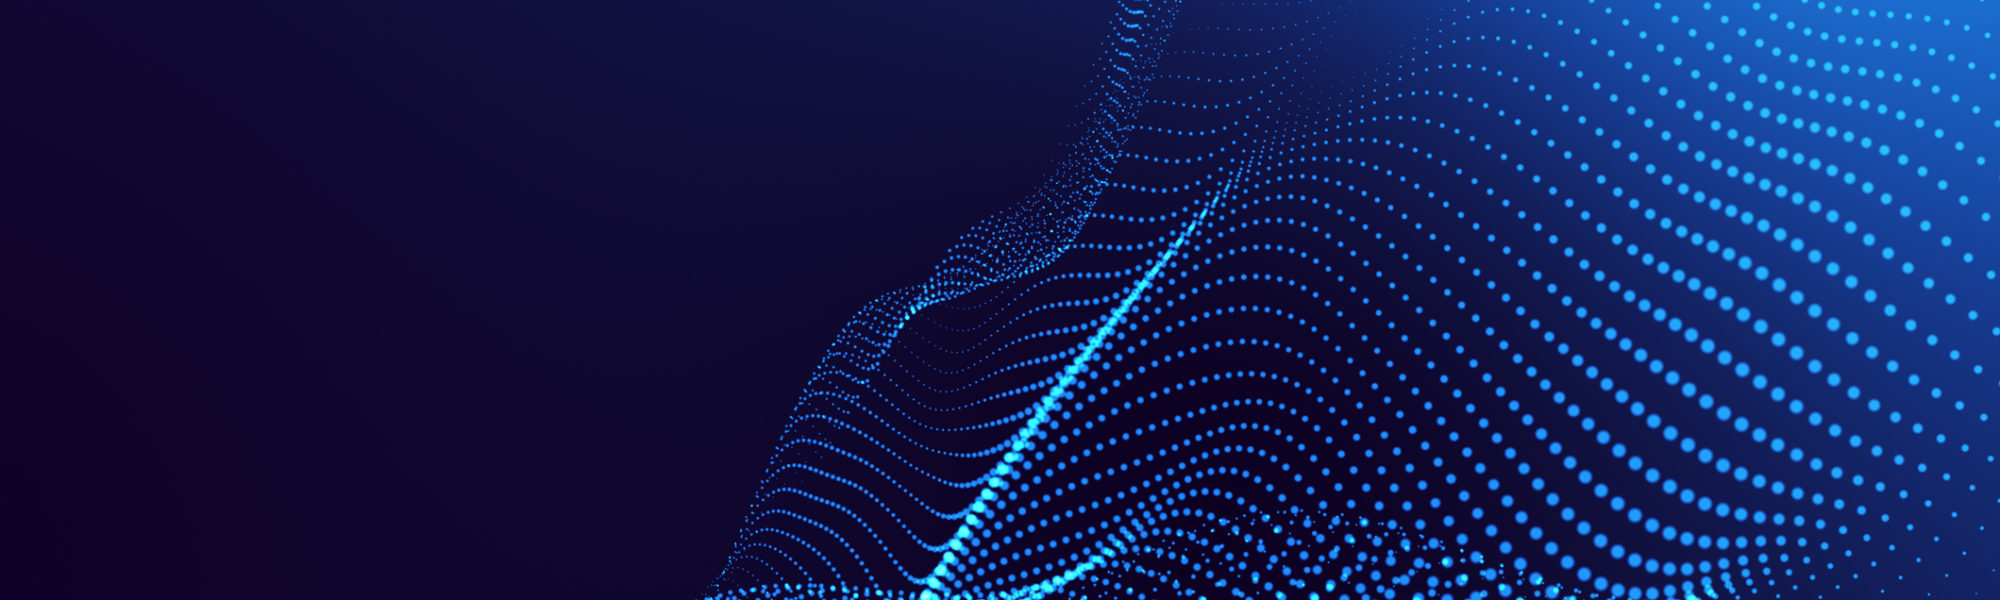 Abstract wave backgrounds